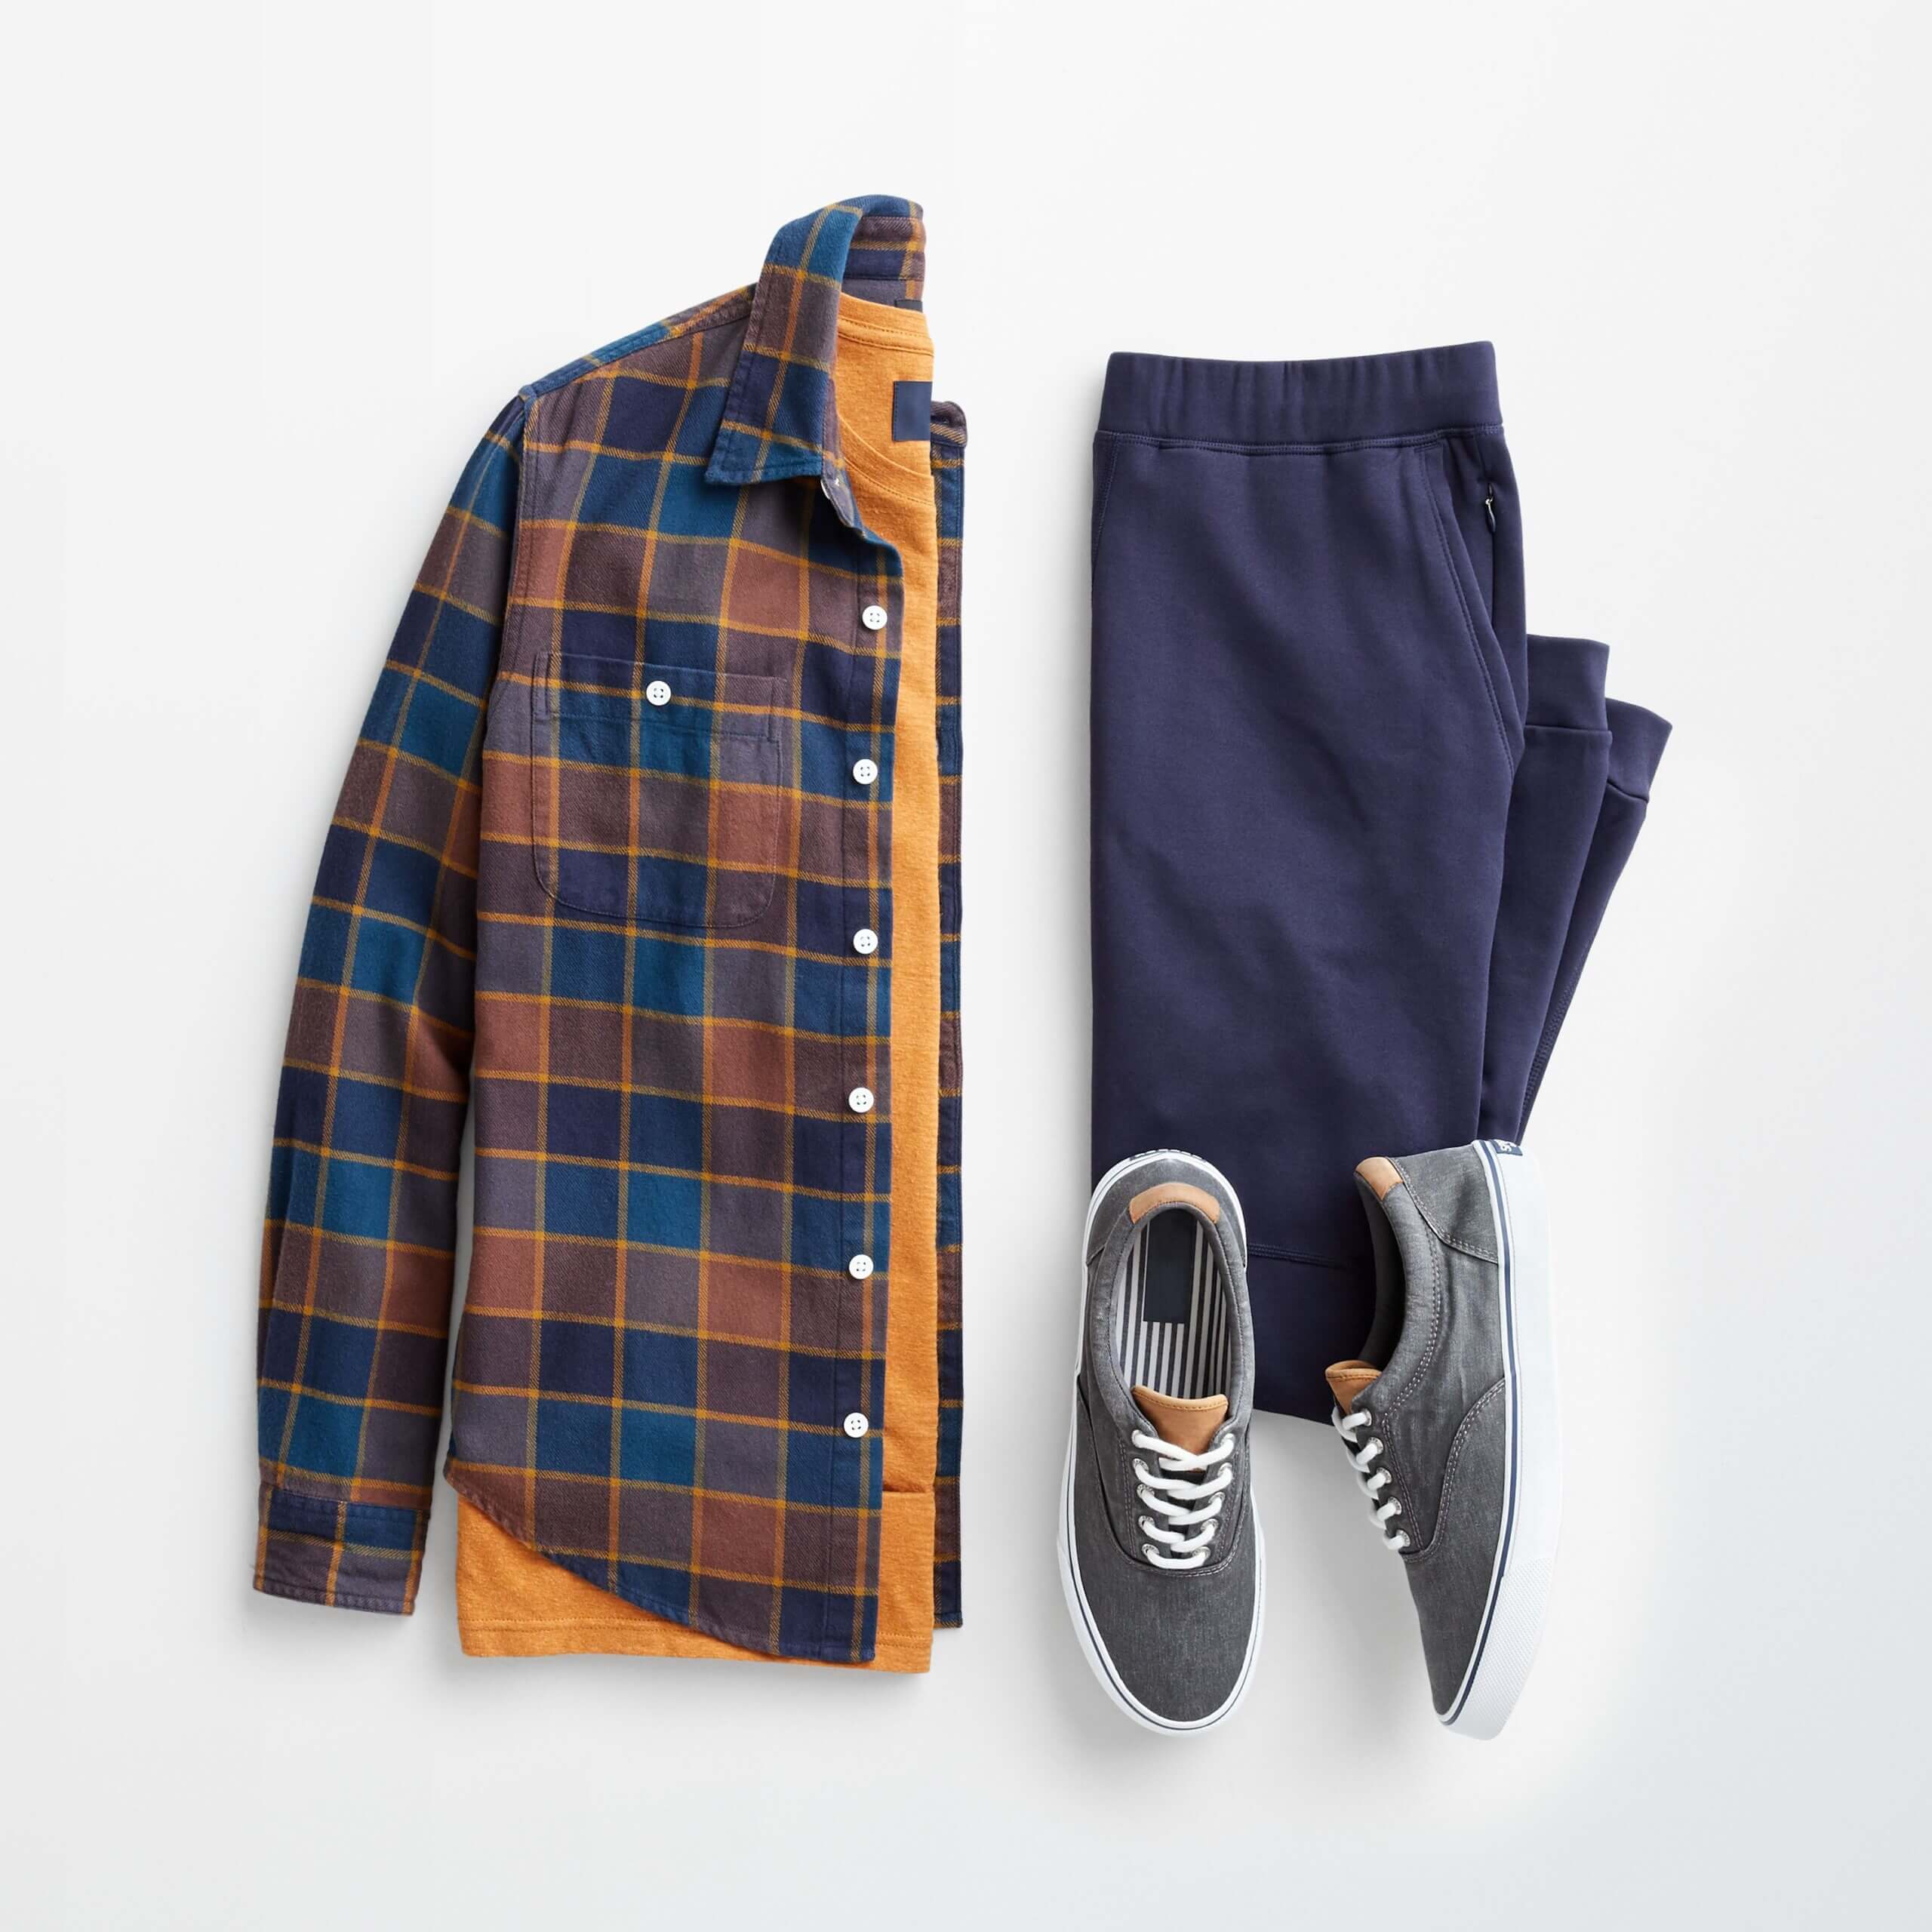 Stitch Fix men's outfit laydown featuring navy blue sweatpants, canvas sneakers and navy blue and mustard plaid flannel over a mustard tee. 